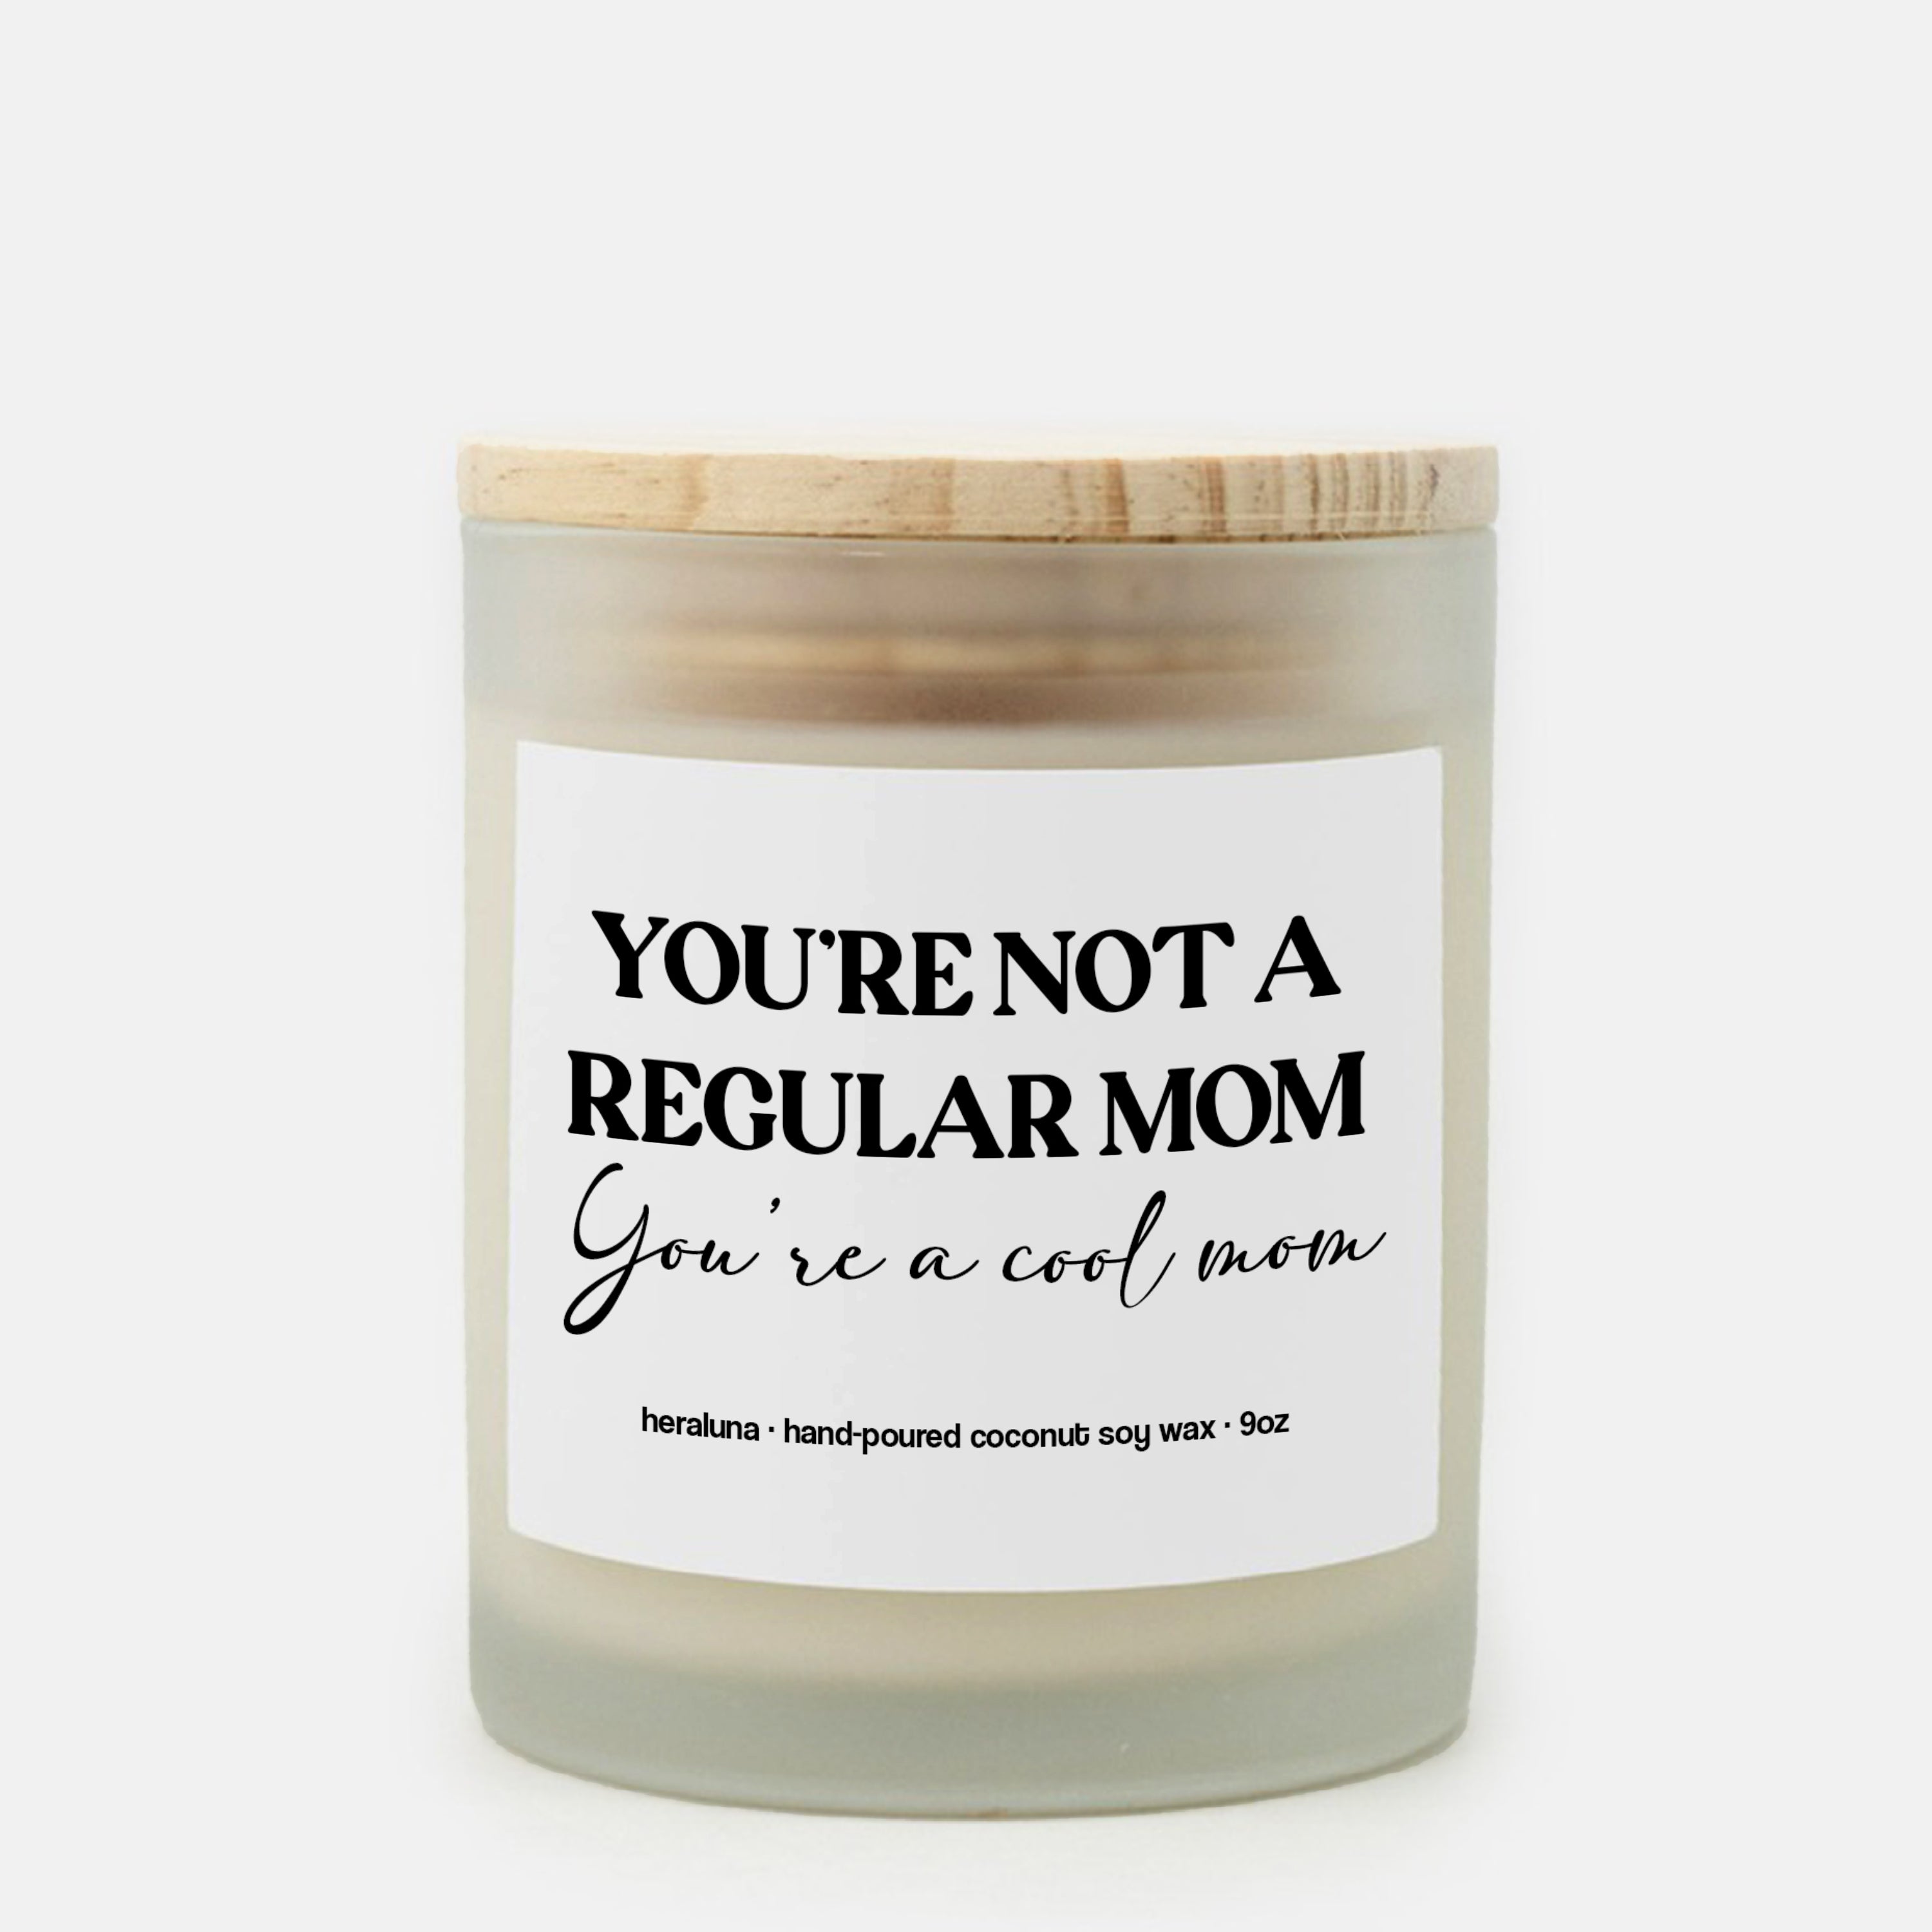 Best Mom Ever Candle – Cool Girl Candles